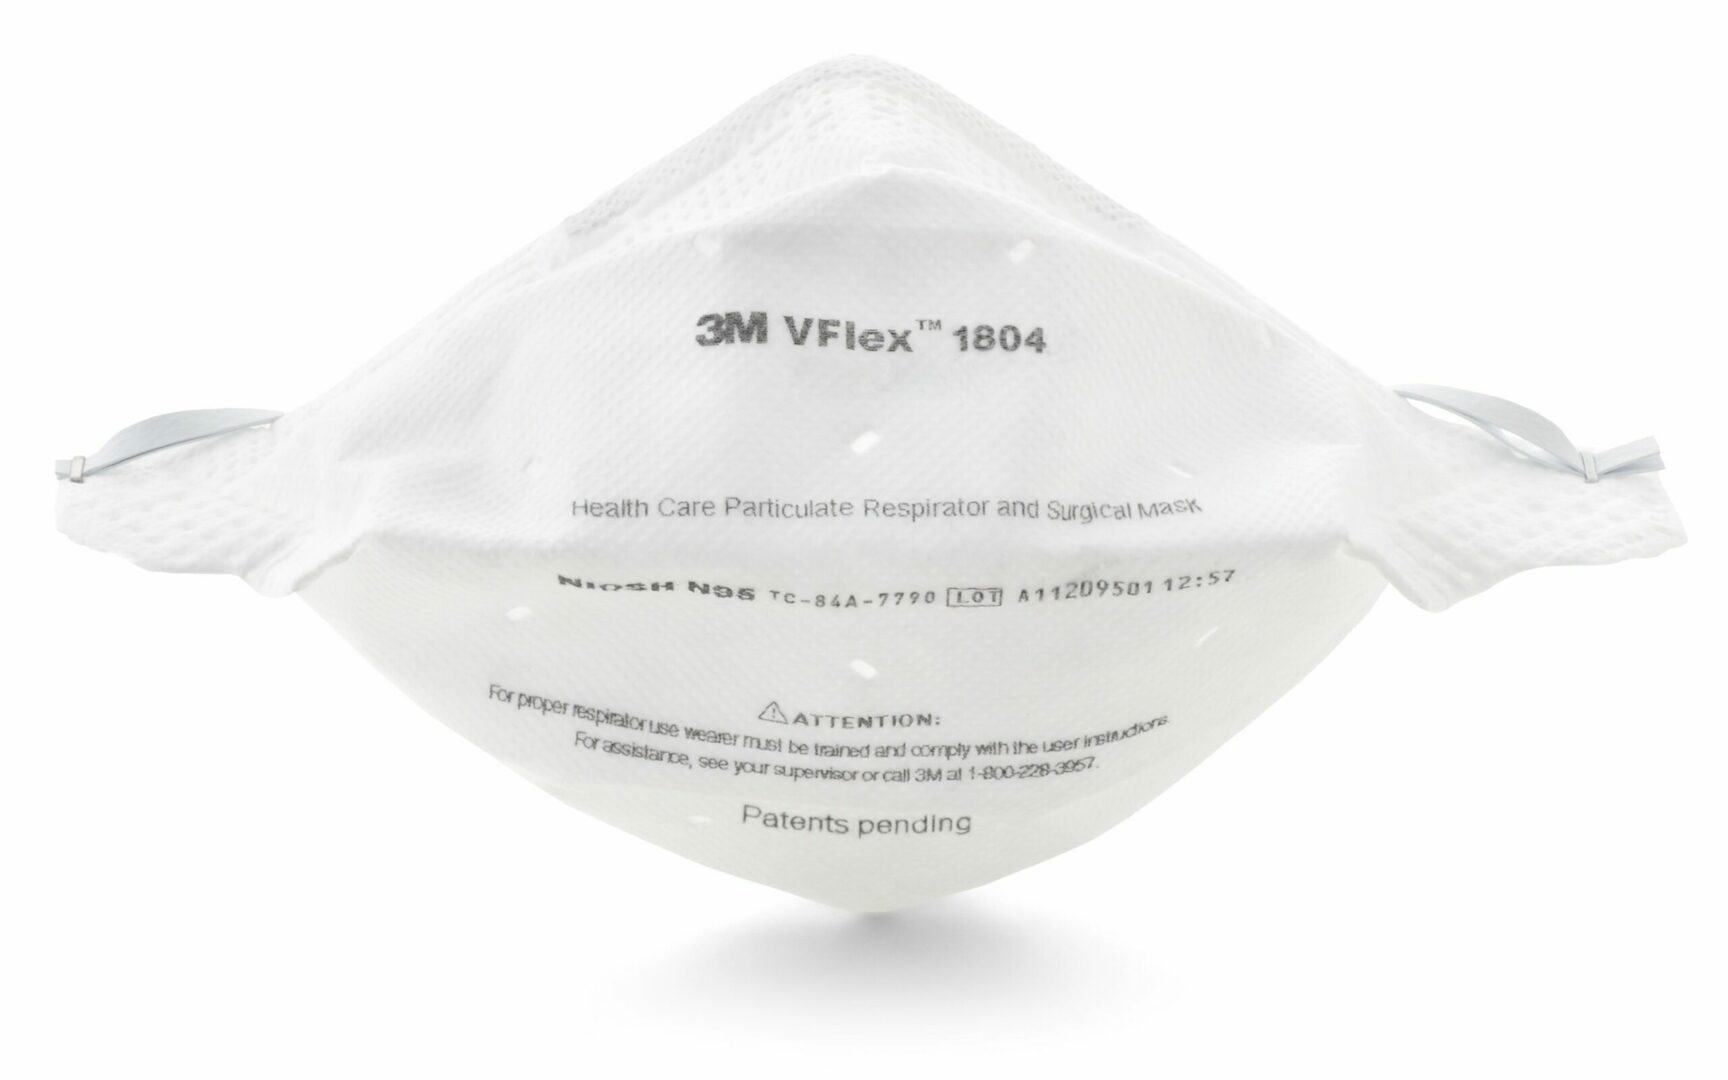 3M Particulate Respirator / Surgical Mask 3M VFlex Medical N95 Flat Fold Elastic Strap One Size Fits Most White NonSterile ASTM F1862 Adult